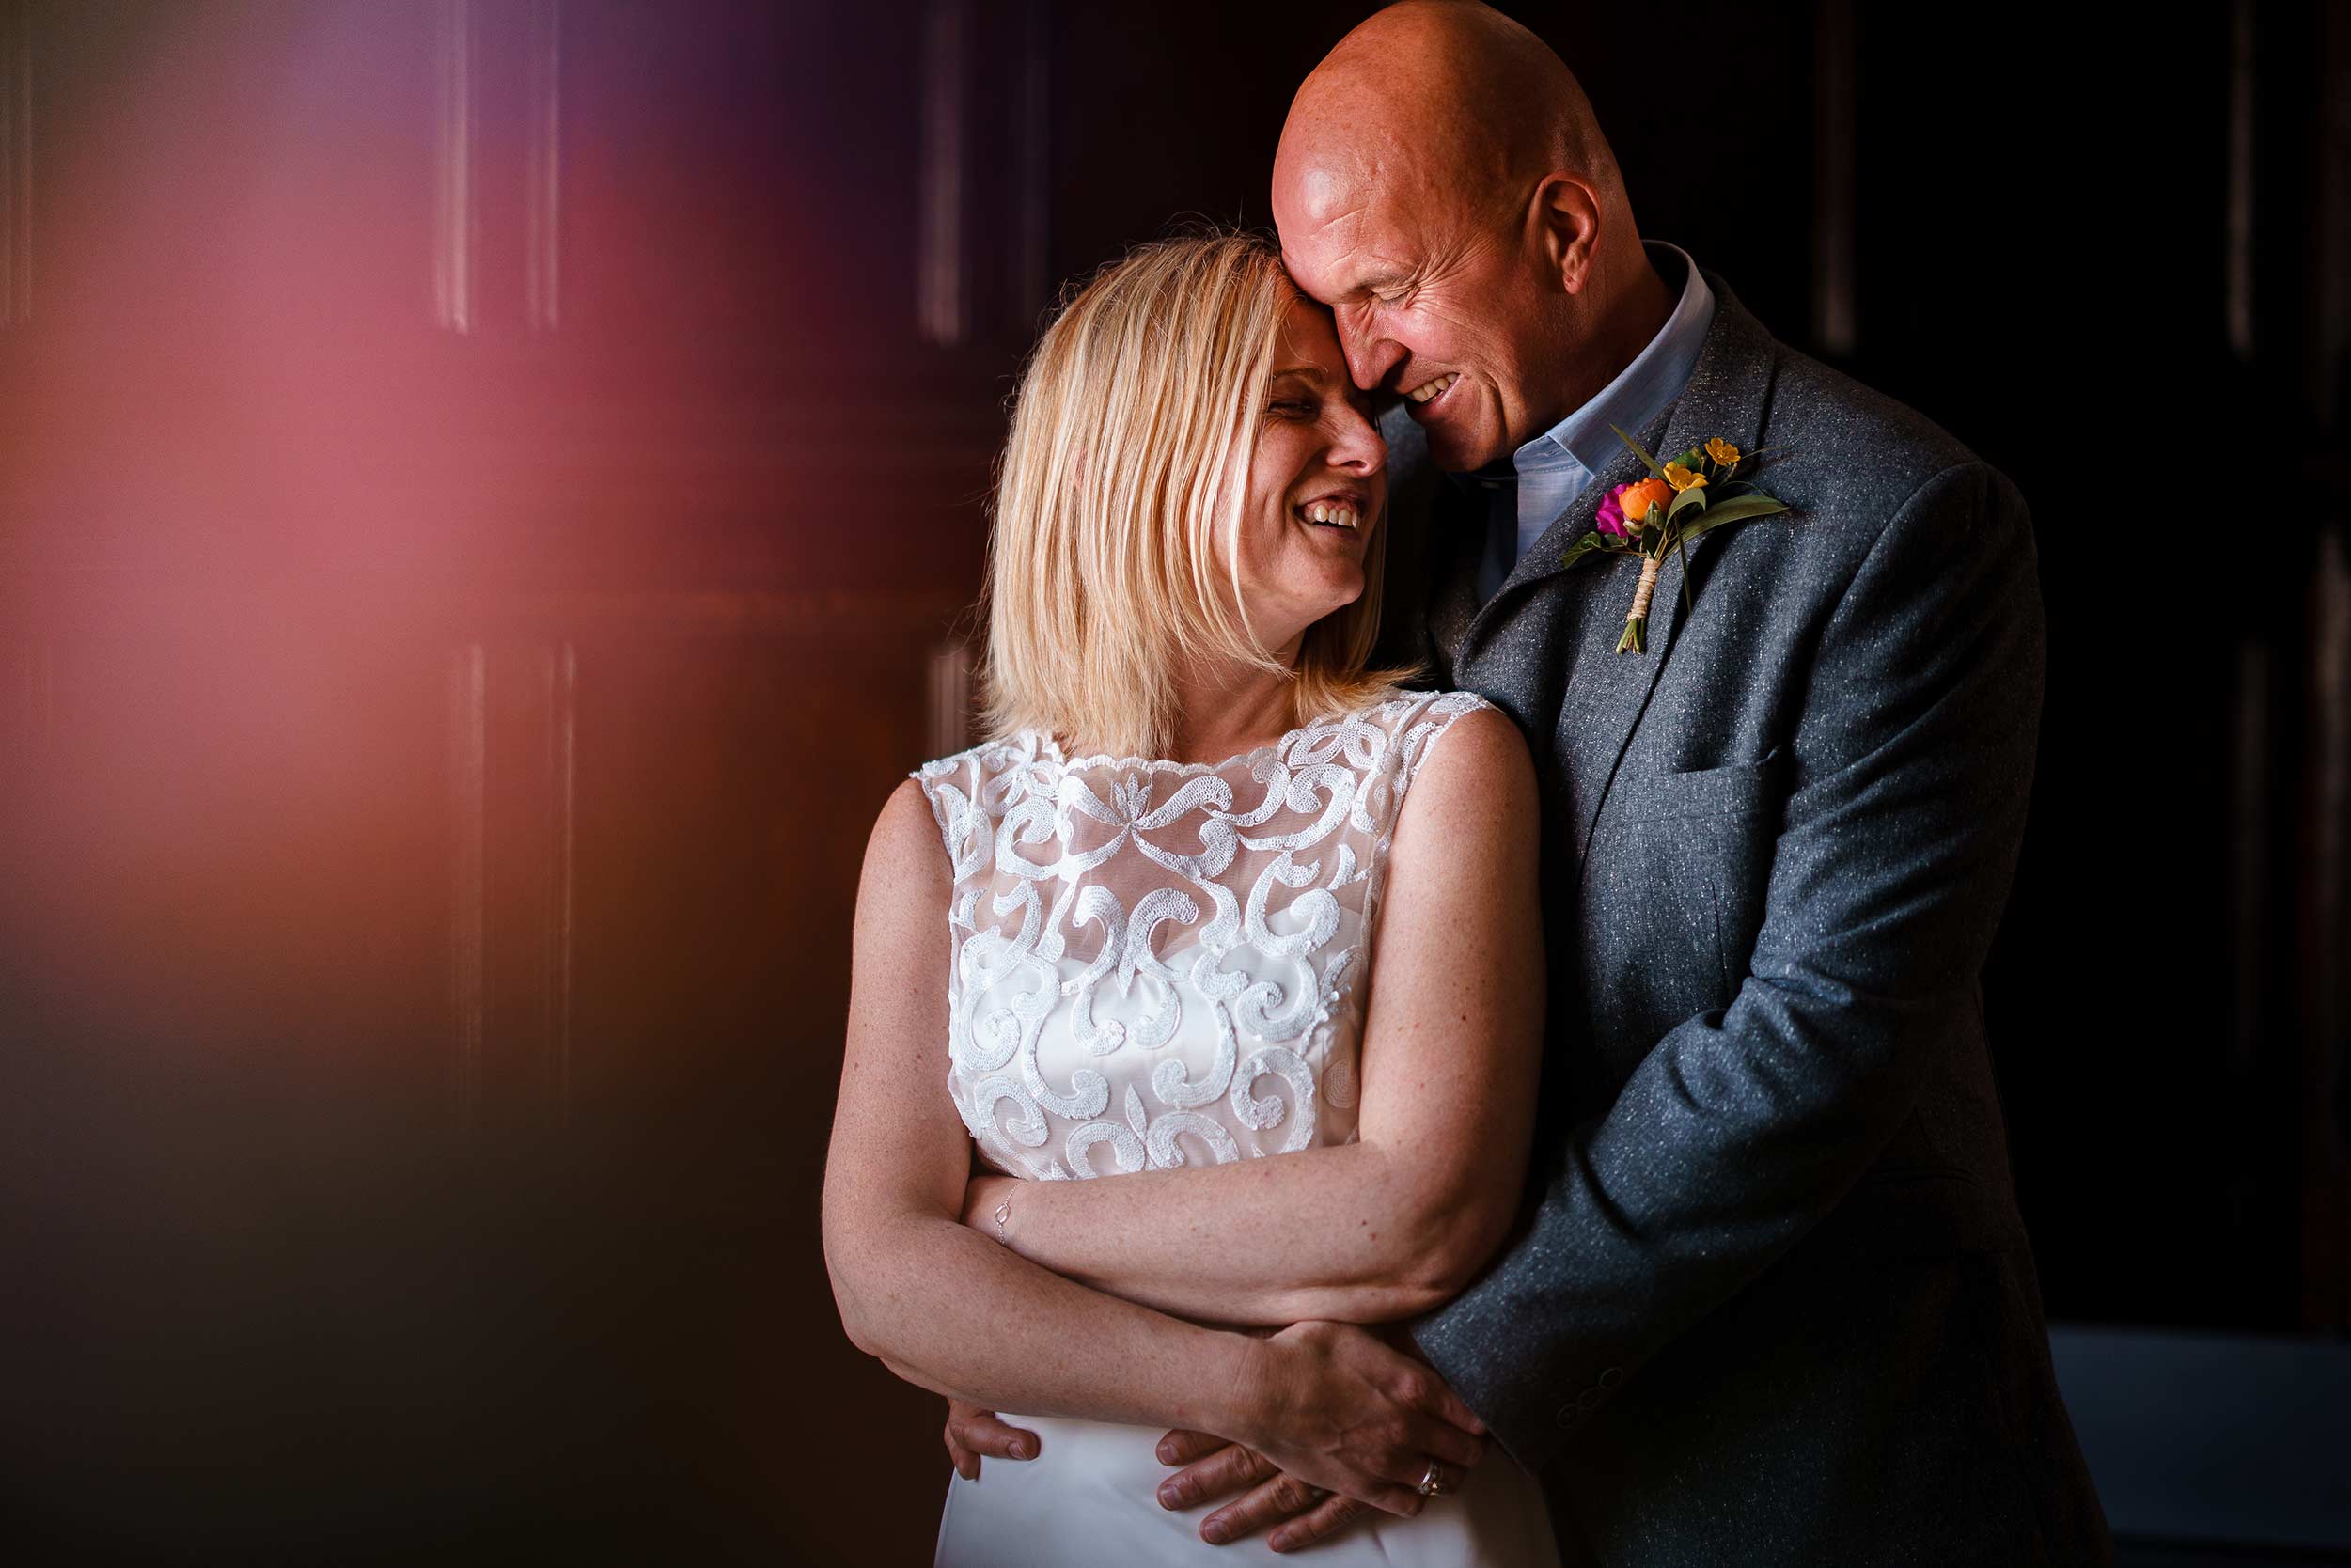 Hereford Elopement Photography - A wedding in Herefordshire